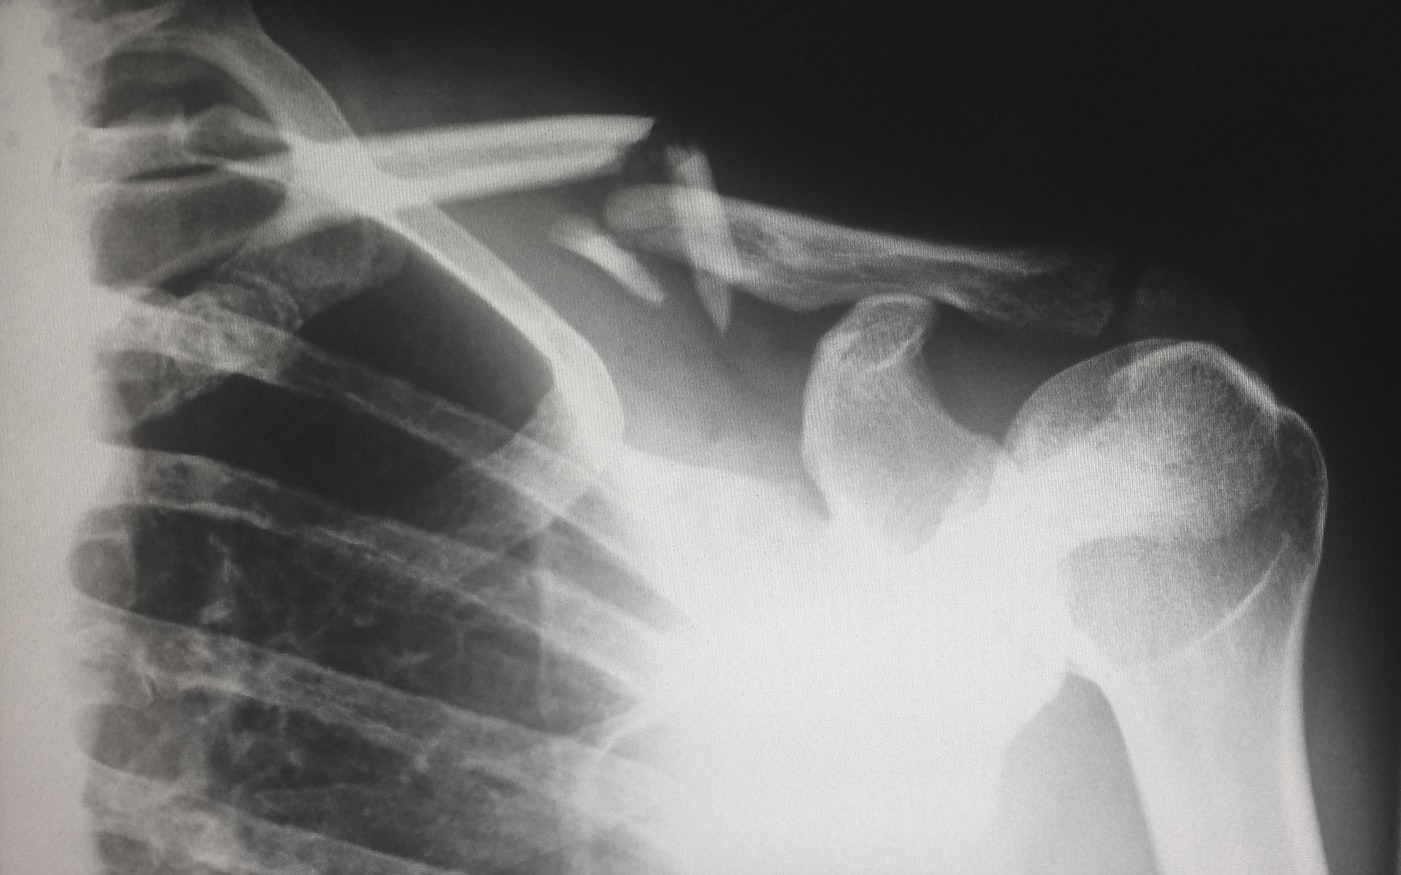 An X-ray (radiograph) of a broken collarbone